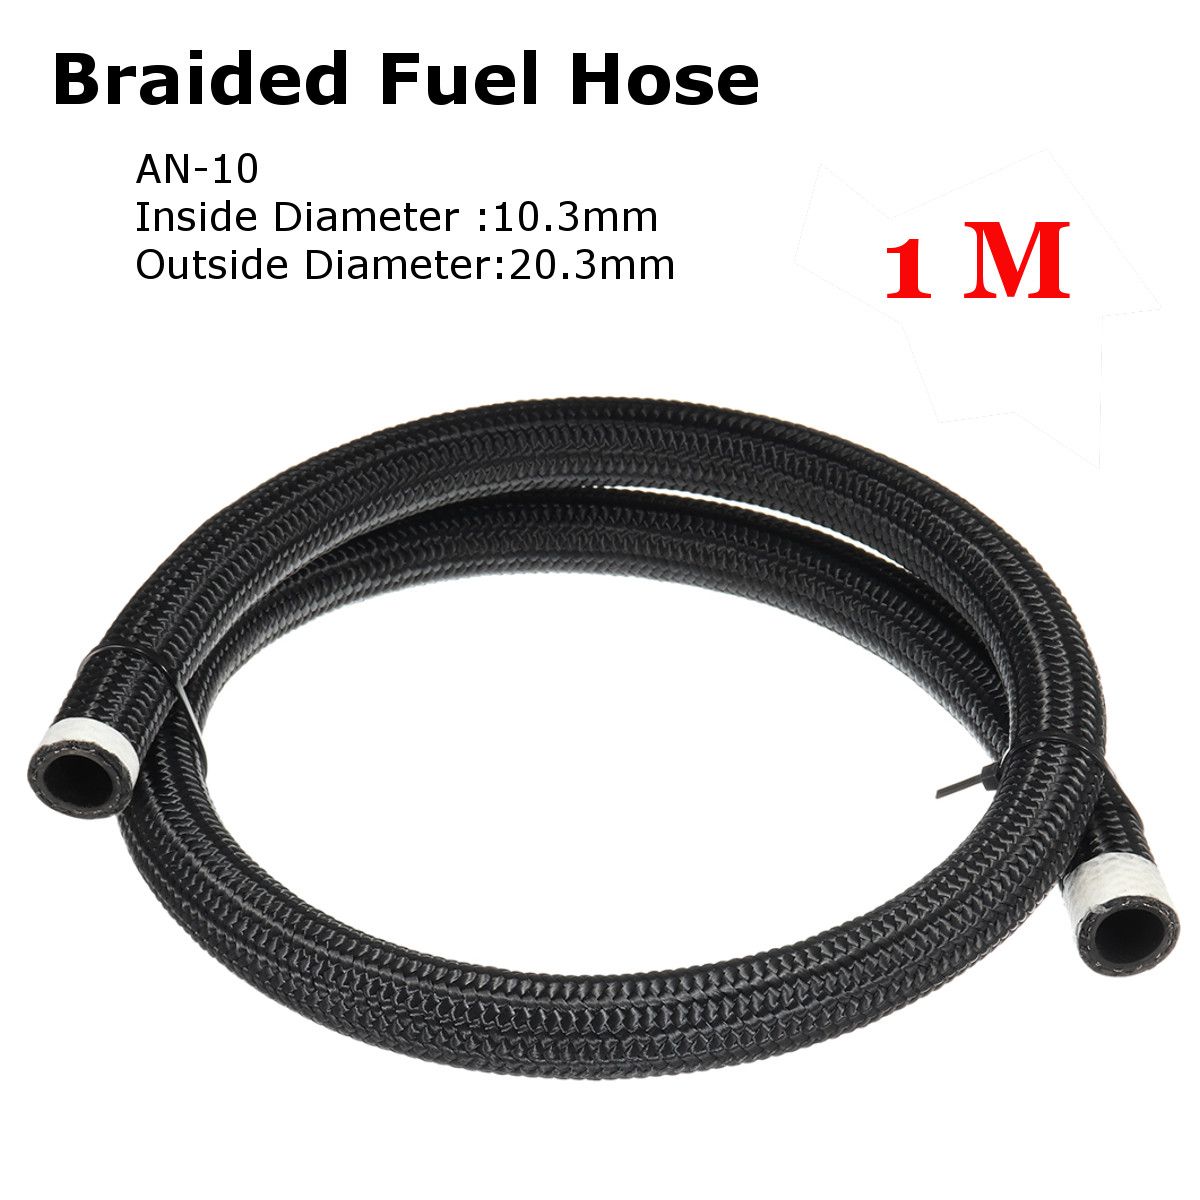 Black-Nylon-Stainless-Steel-Braided-Pipe-Gas-Oil-Fuel-Coolant-Hose-10-AN-AN10-1M-1240671